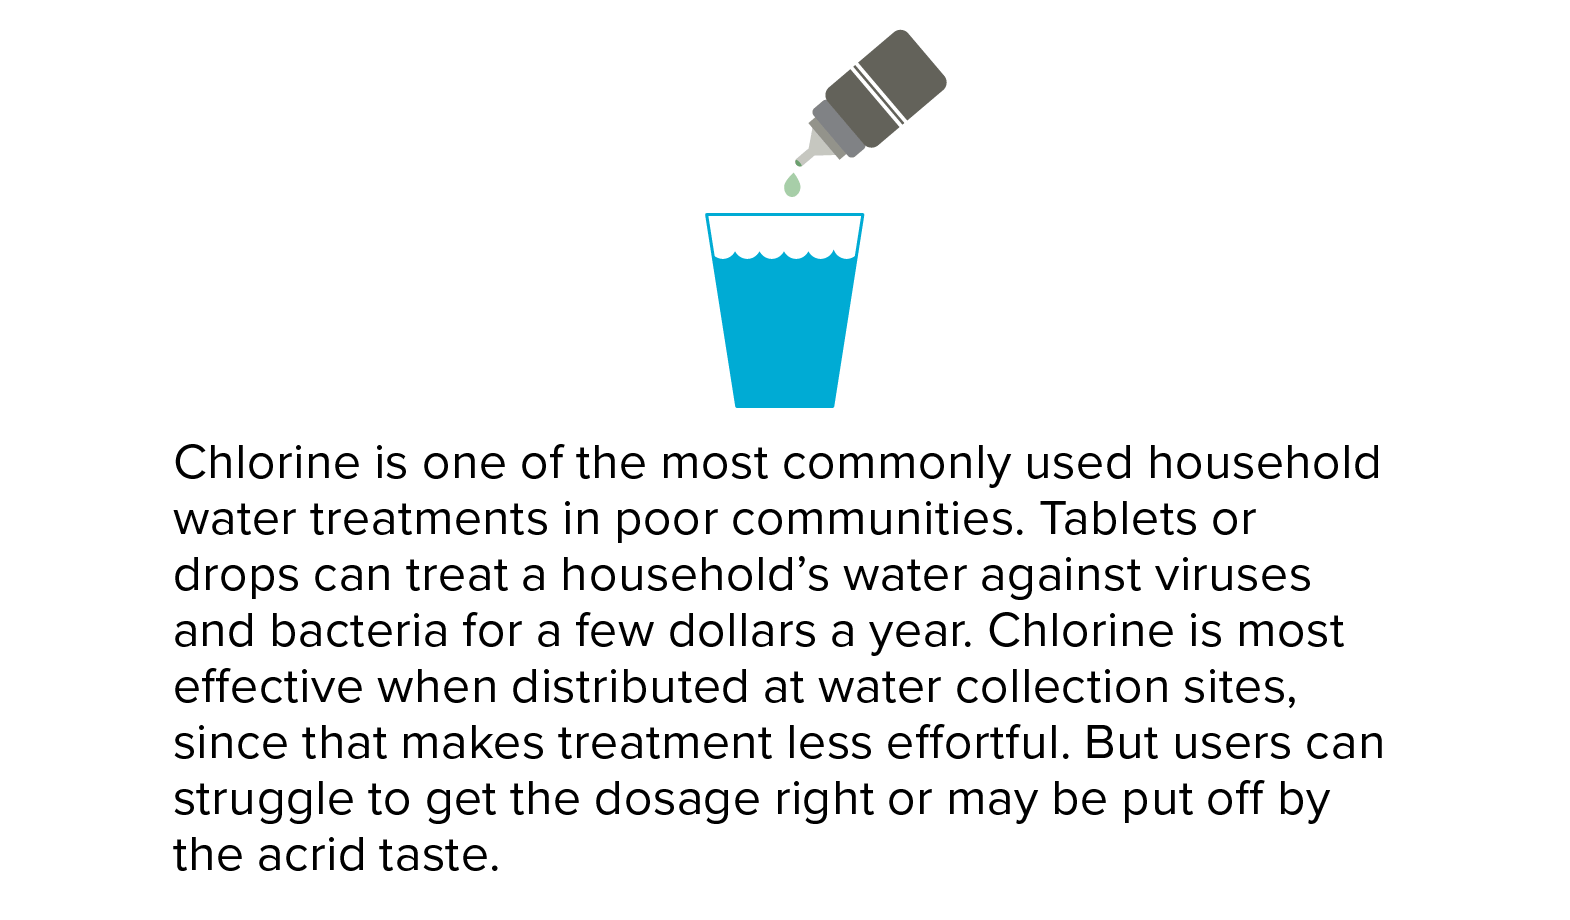 Chlorine is one of the most commonly used household water treatments in poor communities. Tablets or drops can treat a household’s water against viruses and bacteria for a few dollars a year. Chlorine is most effective when distributed at water collection sites, since that makes treatment less effortful. But users can struggle to get the dosage right or may be put off by the acrid taste.